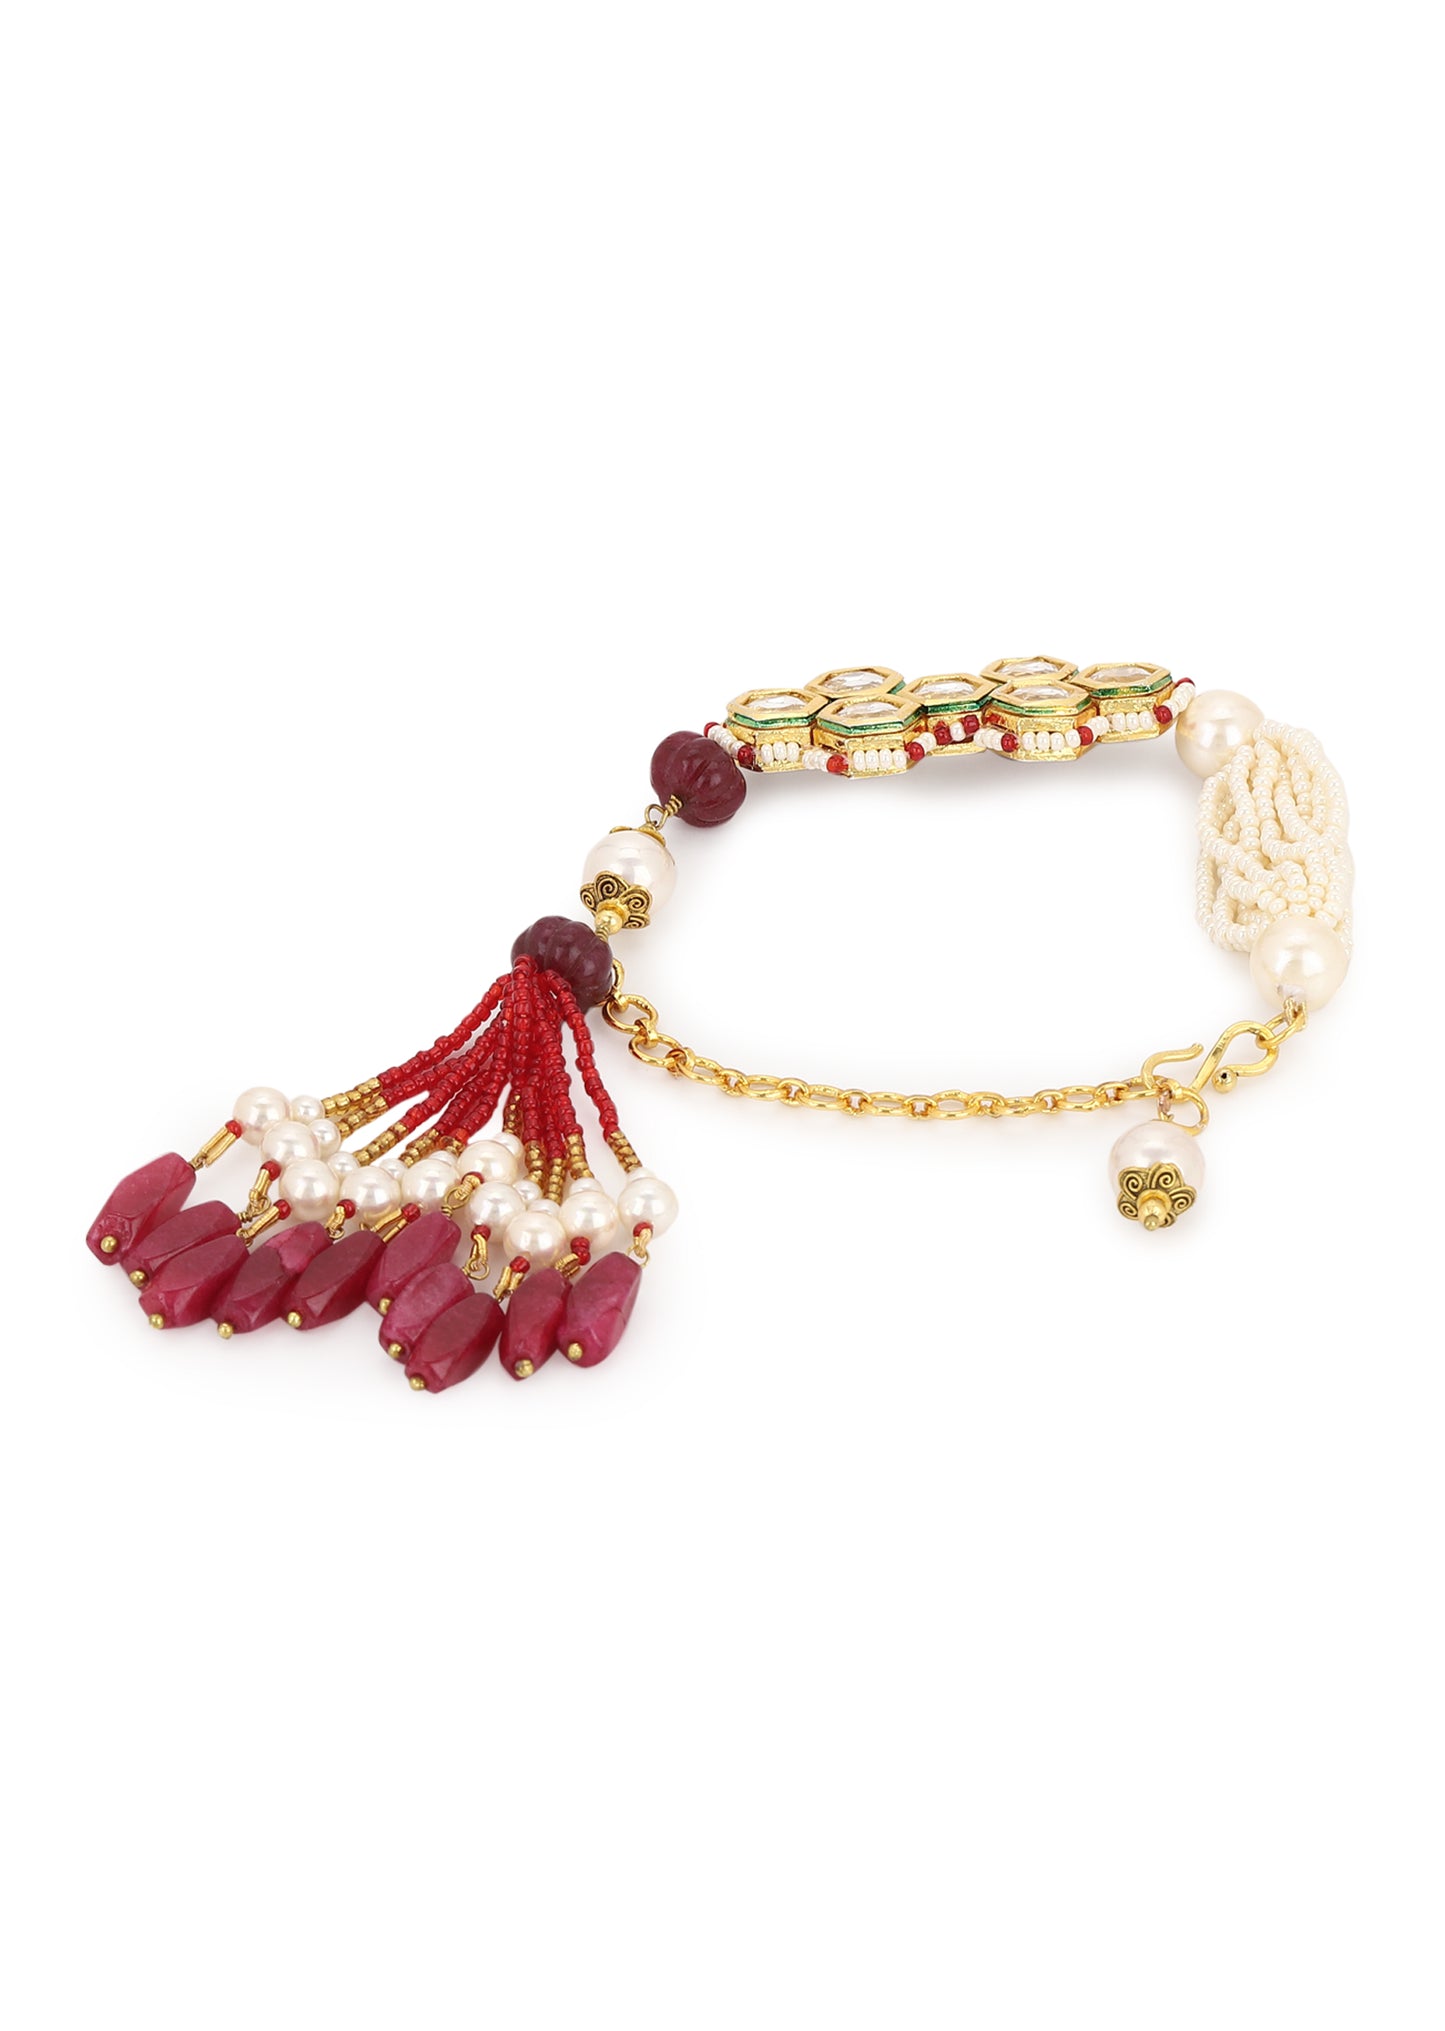 Red Bracelet Kashti Tassel at Kamakhyaa by House Of Heer. This item is Add Ons, Alloy Metal, Bracelets, Festive Jewellery, Festive Wear, Free Size, jewelry, July Sale, July Sale 2023, Less than $50, Natural, Pearl, Red, Textured